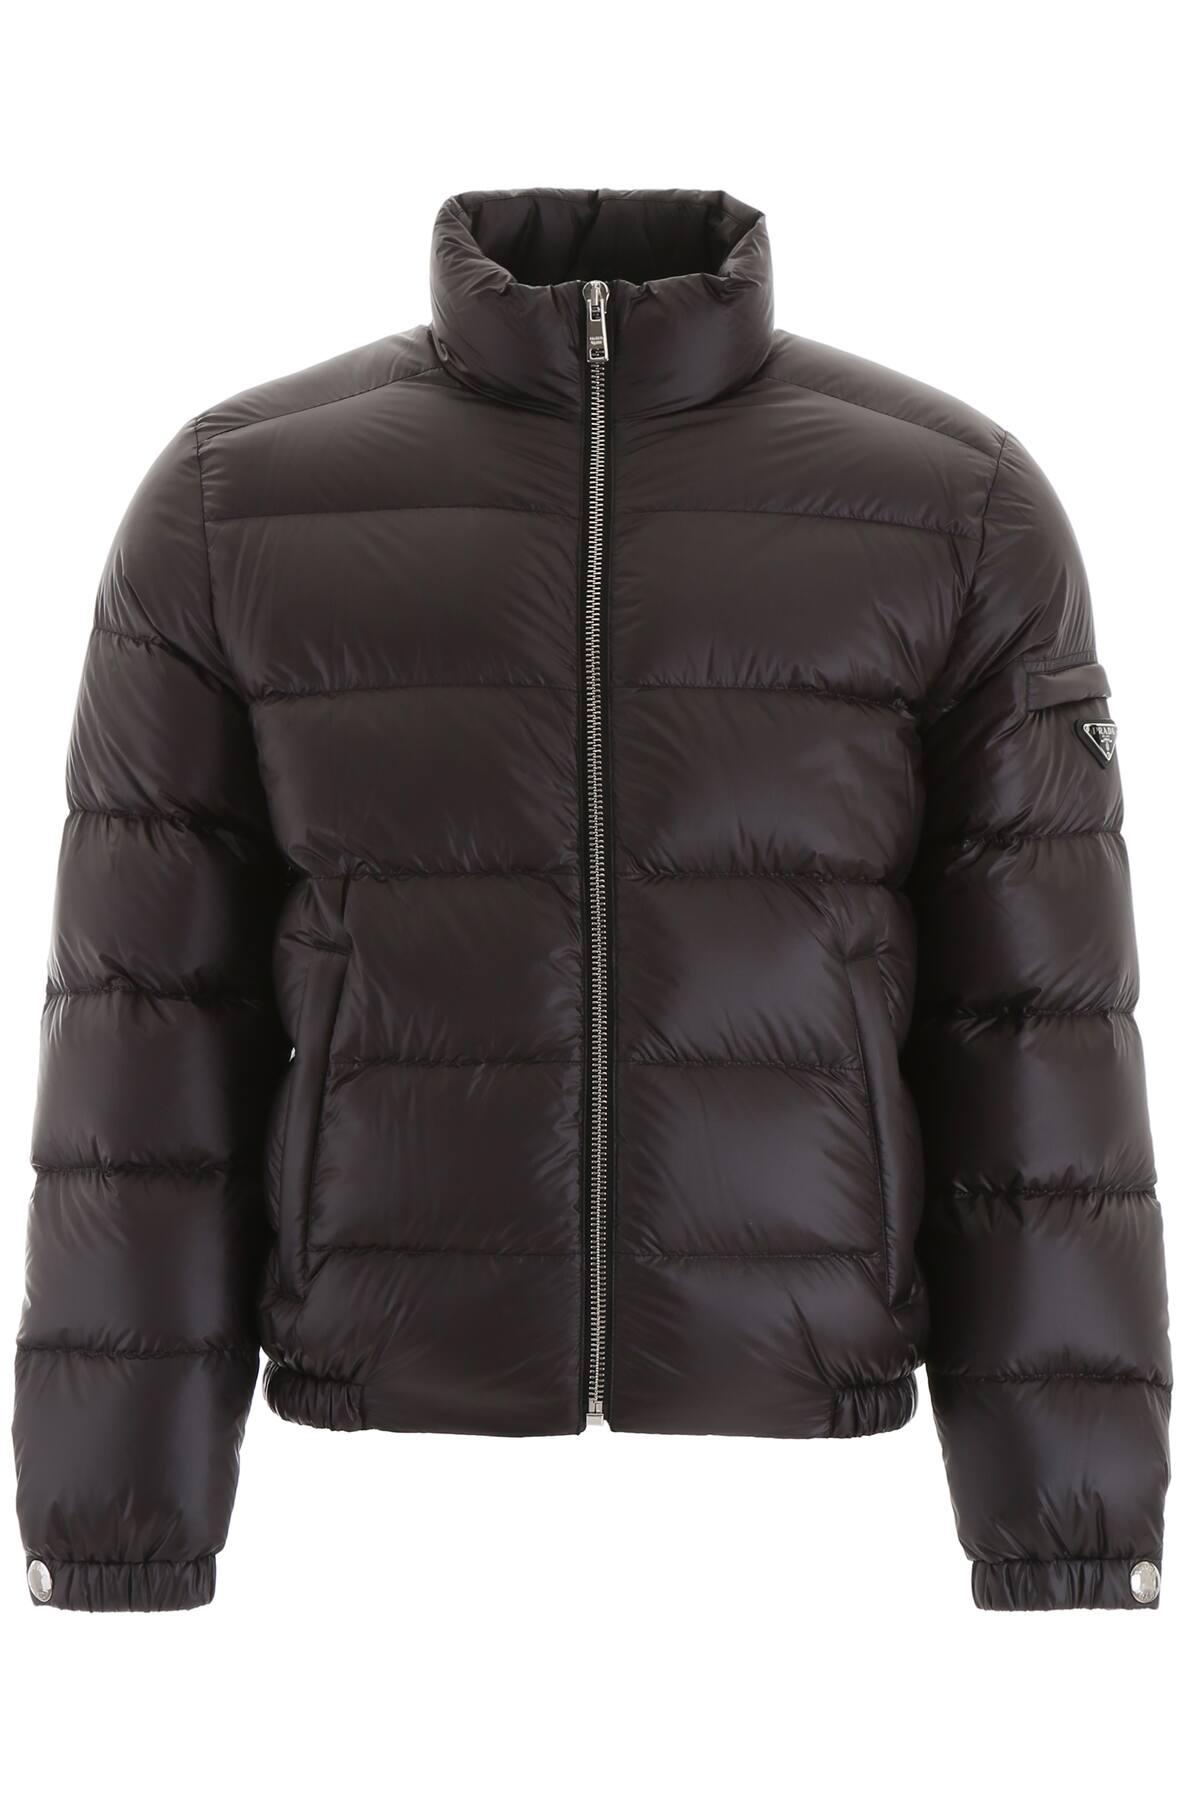 Prada Synthetic Puffer Jacket With Contrast Lining in Black,Green ...